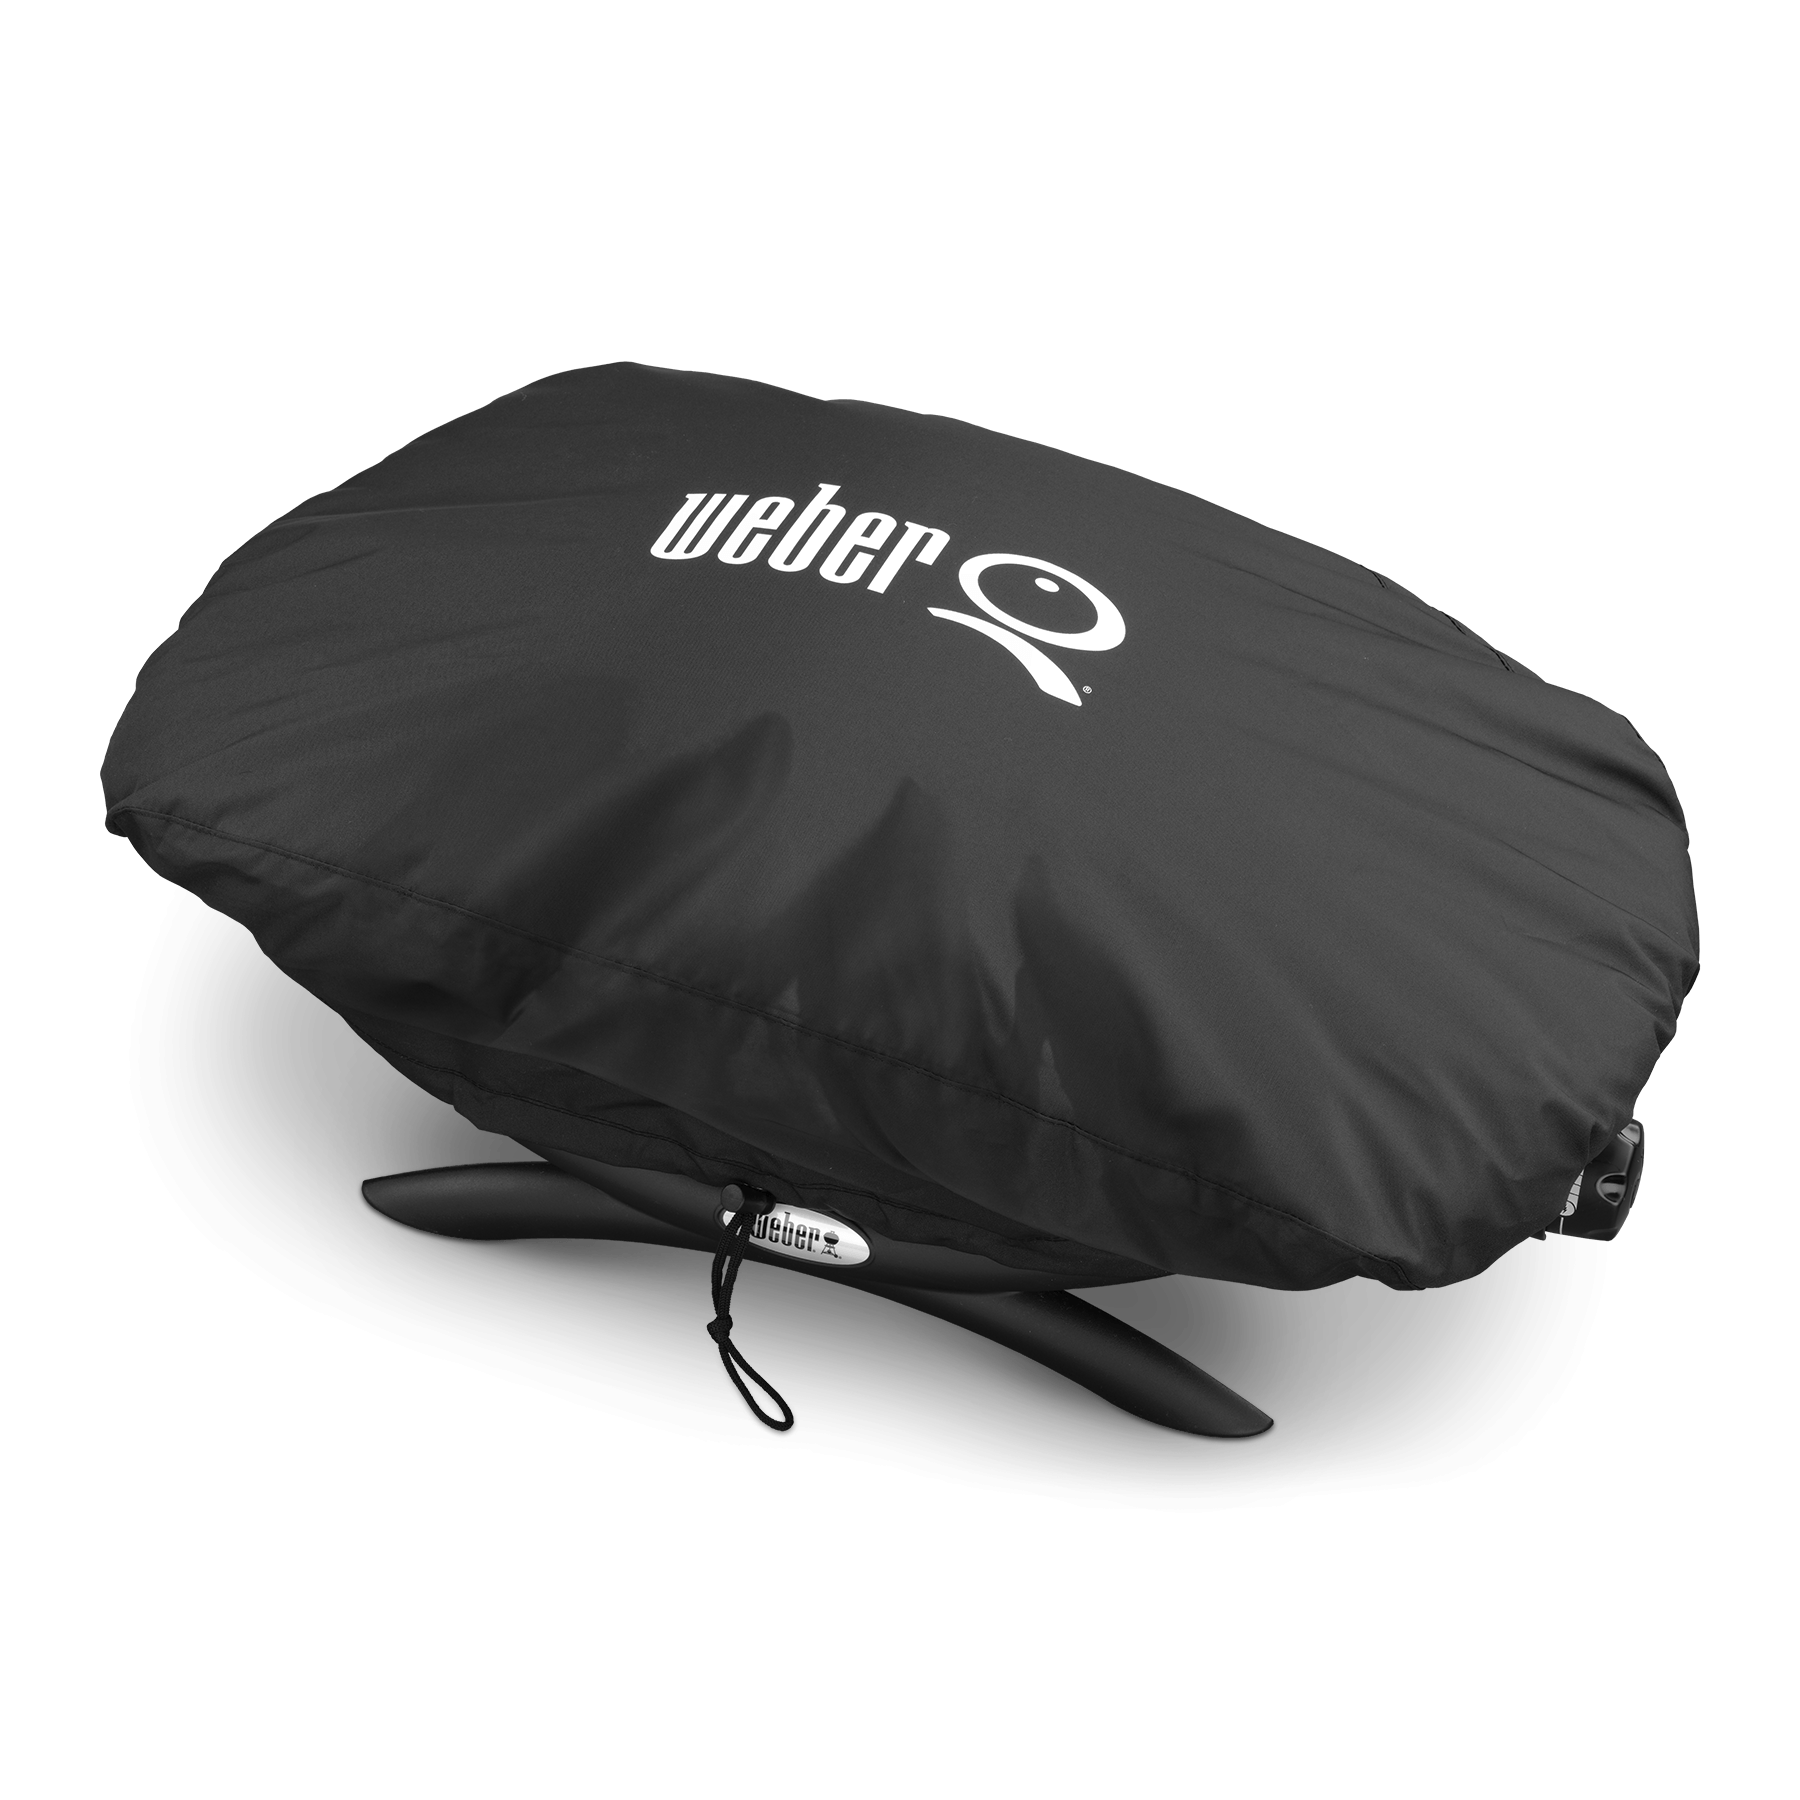 Weber 7111 Grill Cover Fits Q200 & 2000 Series Gas Grills 